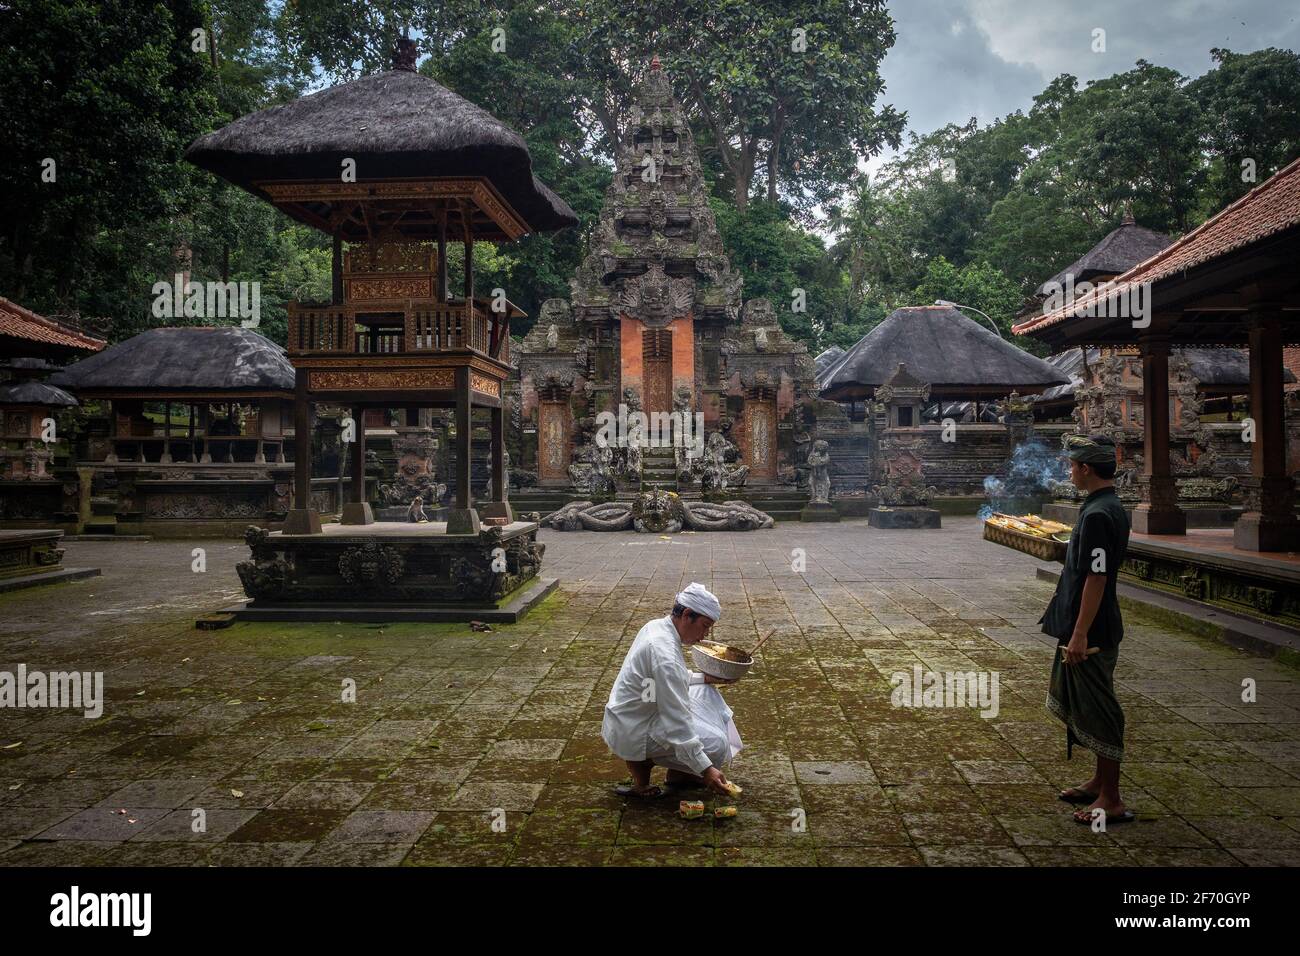 Balinese Hindus bring offerings to the ancient Dalem Agung Padangtegal temple at the Sacred Monkey Forest in Ubud, Bali, Indonesia. Stock Photo